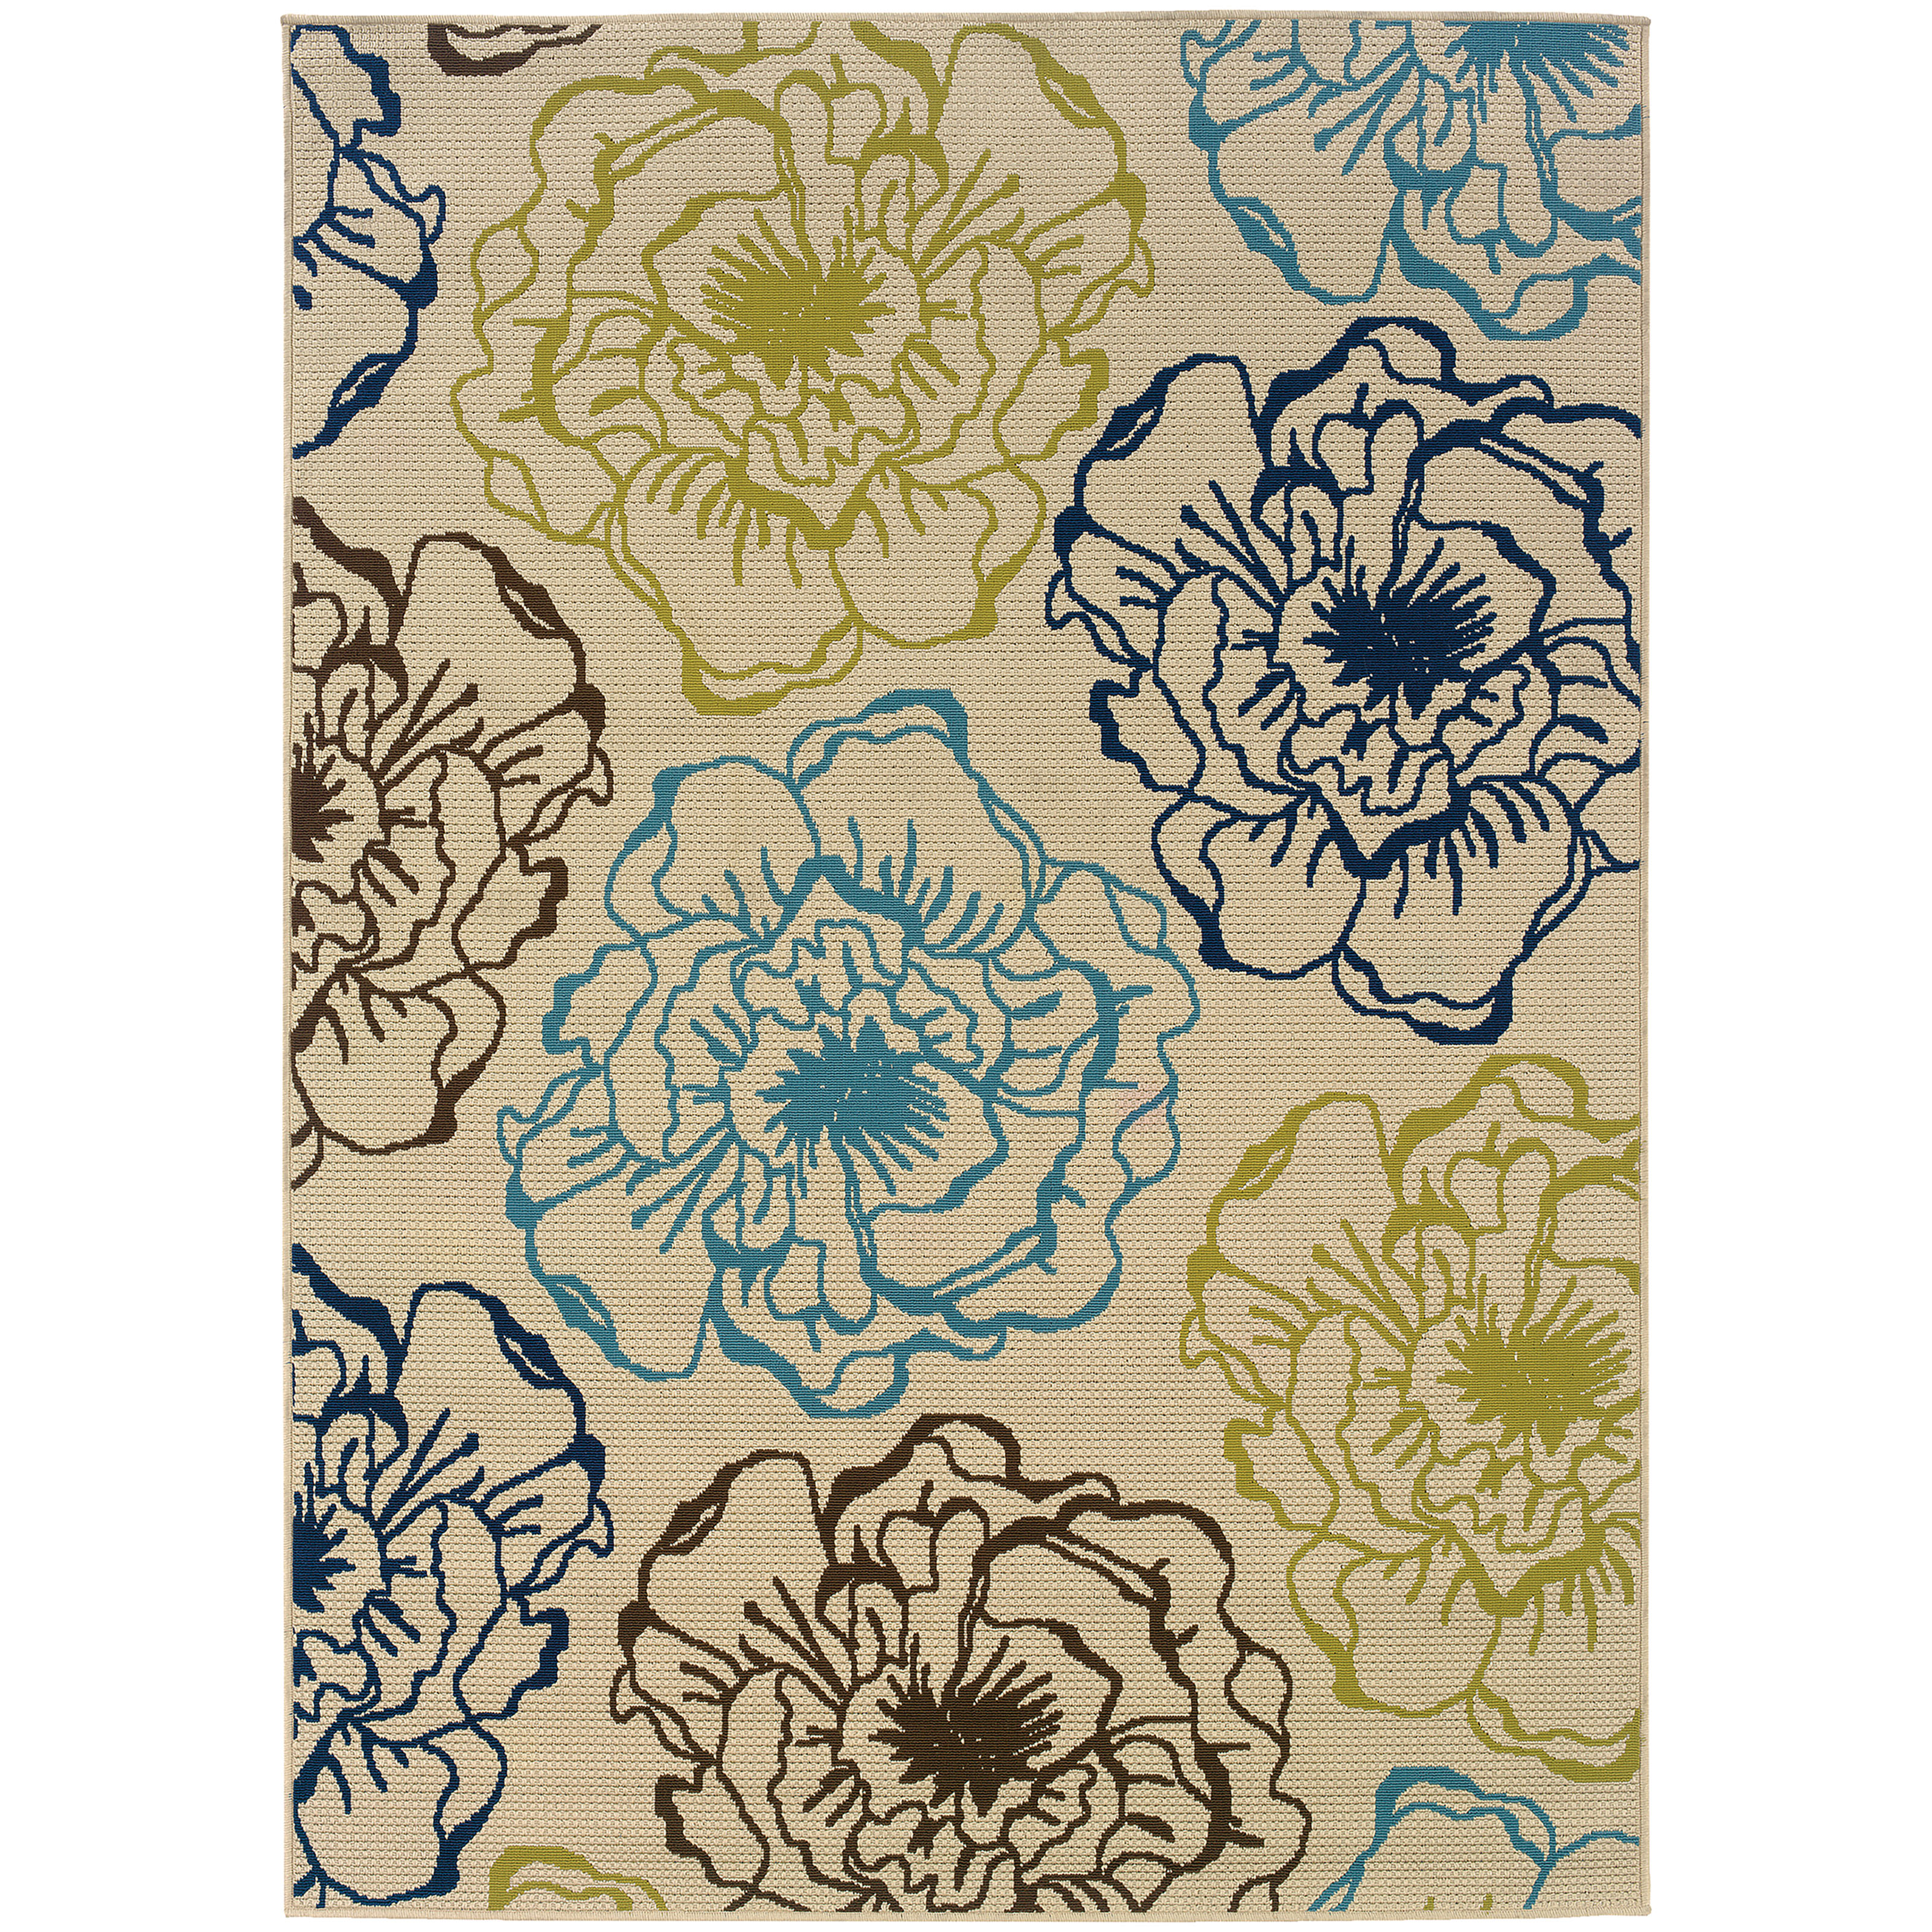 Avalon Home Cameron Overscale Floral Indoor/Outdoor Area Rug - image 1 of 2